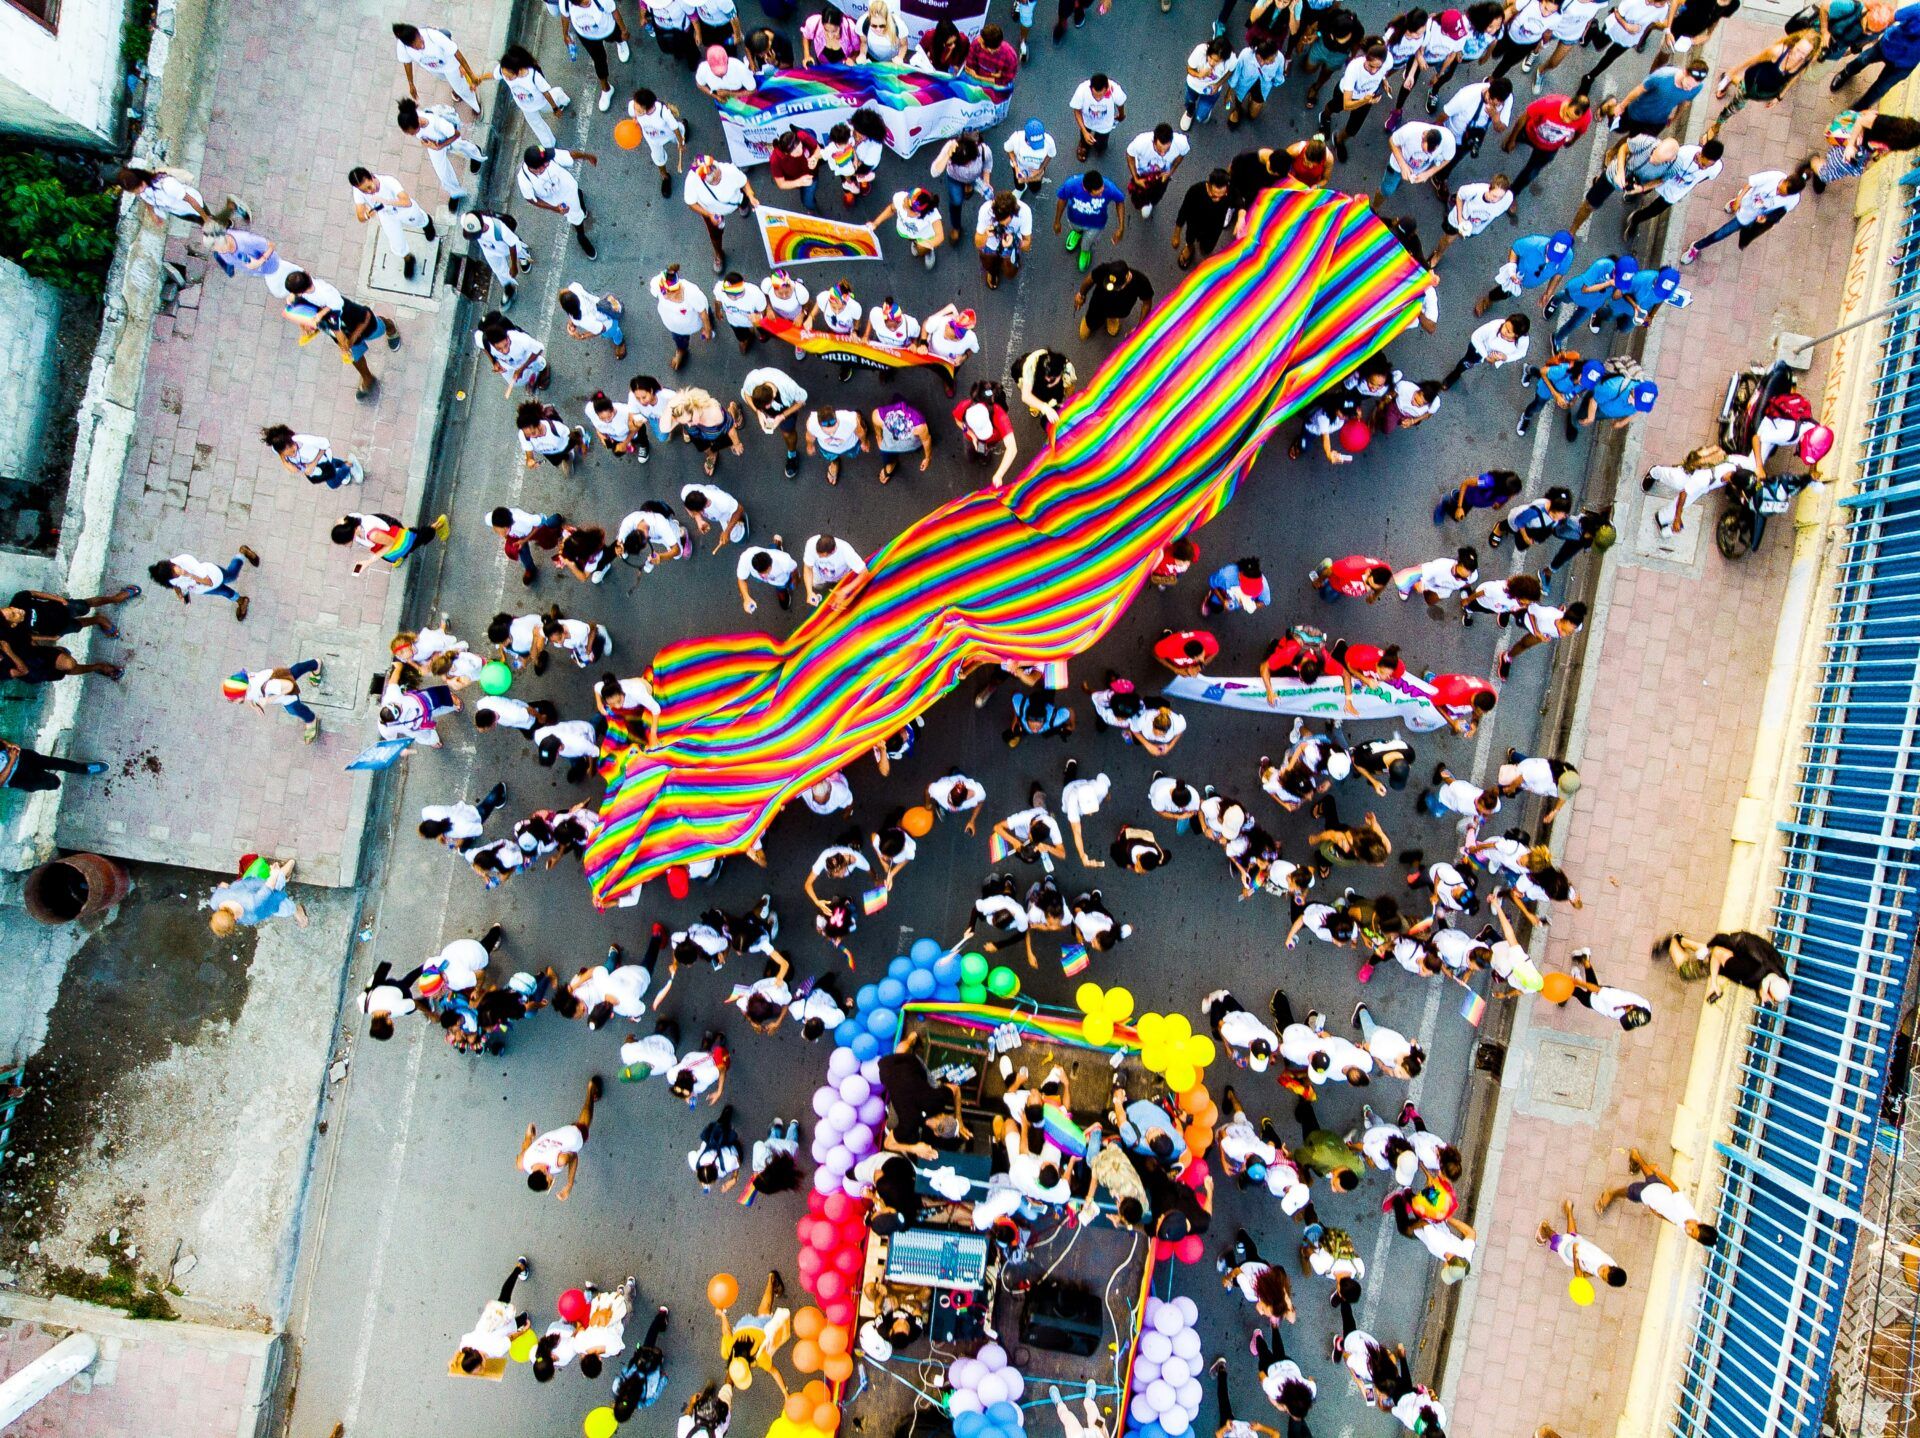 People protesting on the street for LGBTIQ+ rights. Photo by Tanushree Rao on Unsplash.